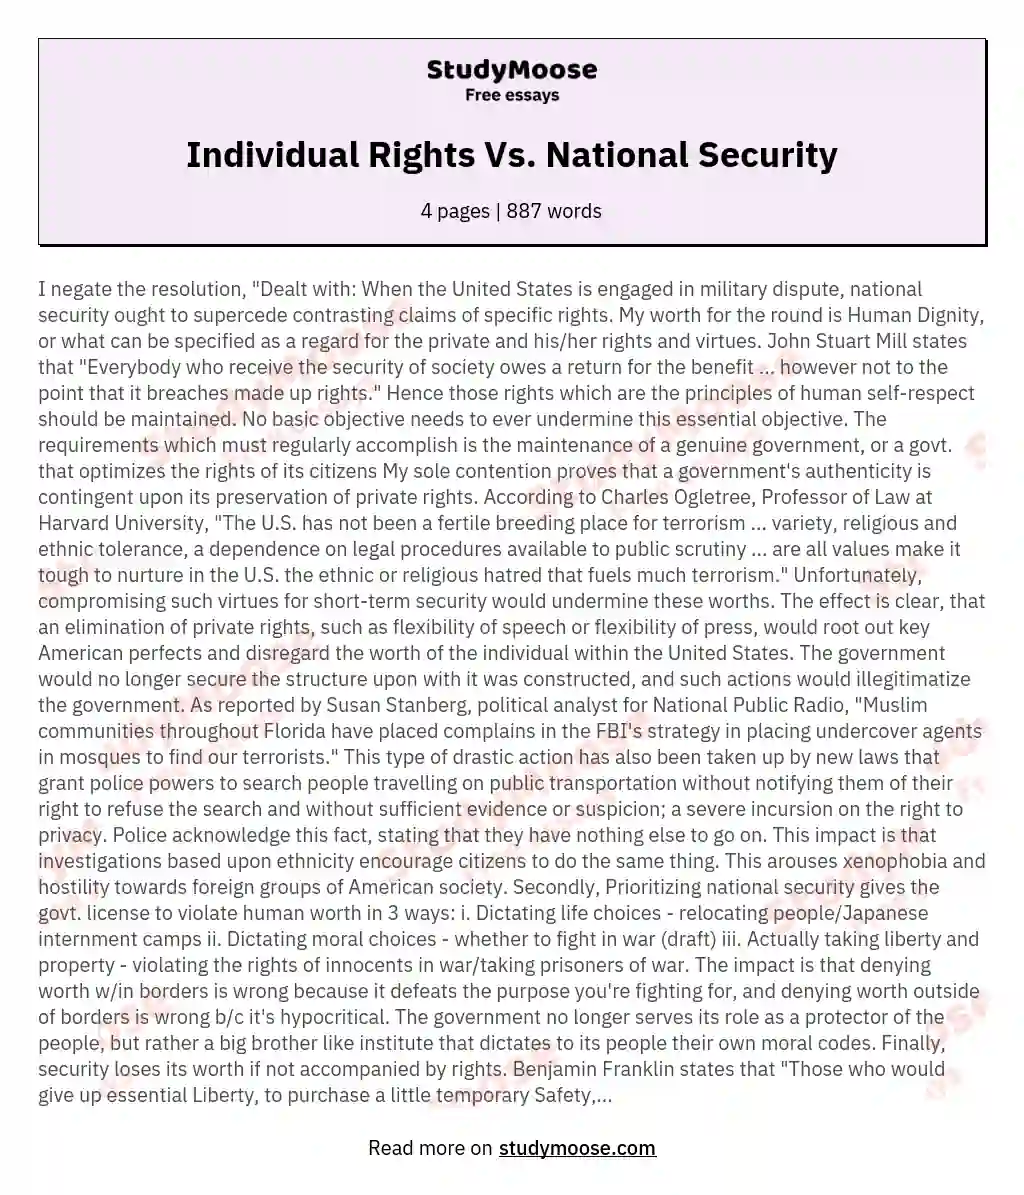 Individual Rights Vs. National Security essay